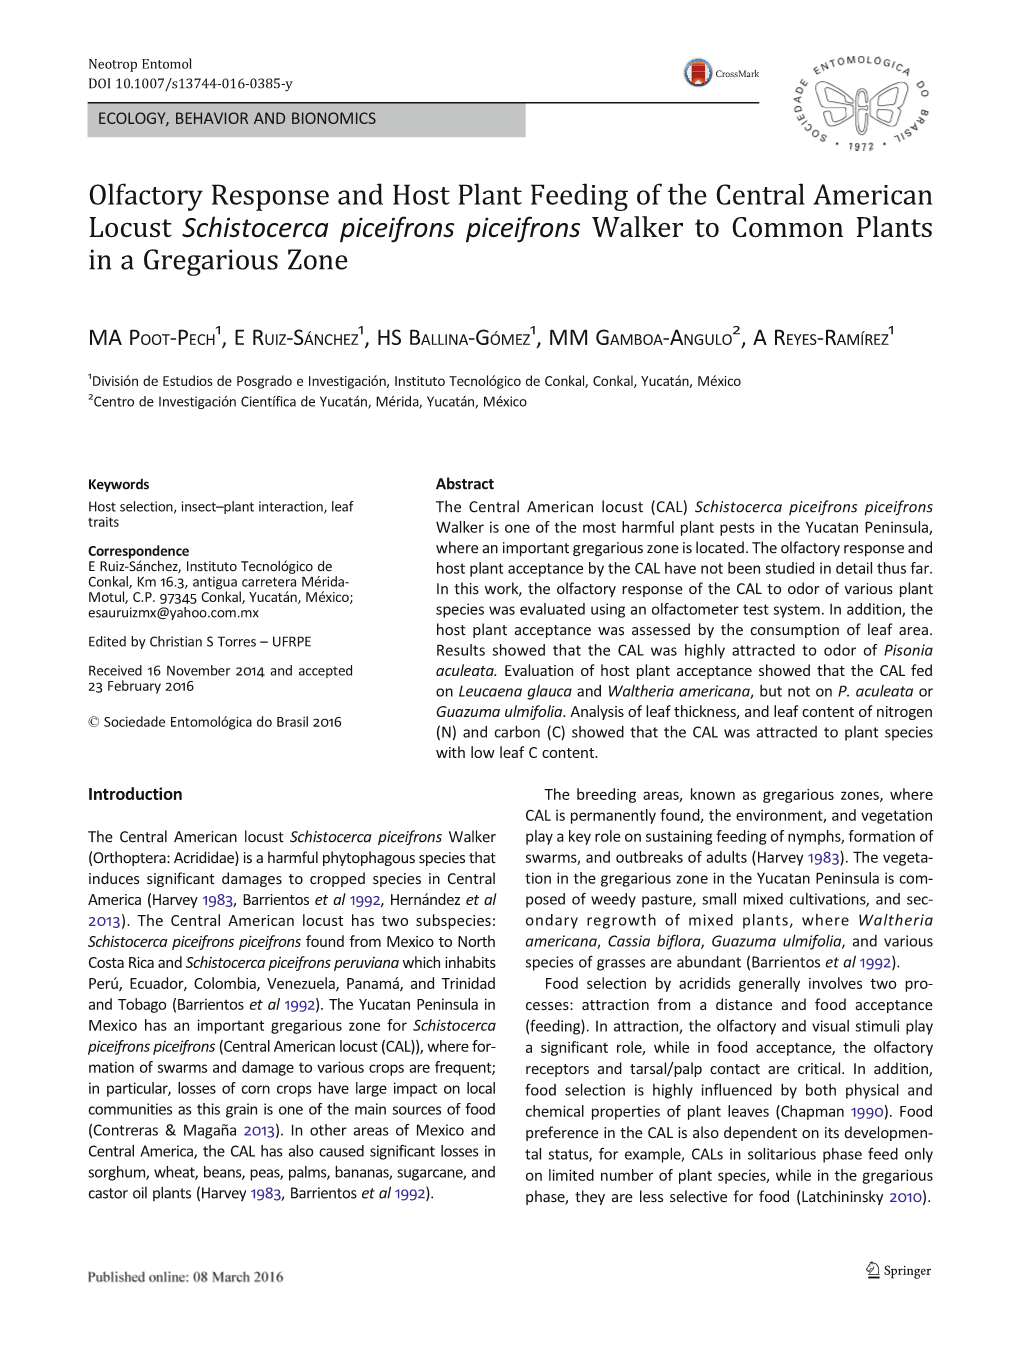 Olfactory Response and Host Plant Feeding of the Central American Locust Schistocerca Piceifrons Piceifrons Walker to Common Plants in a Gregarious Zone